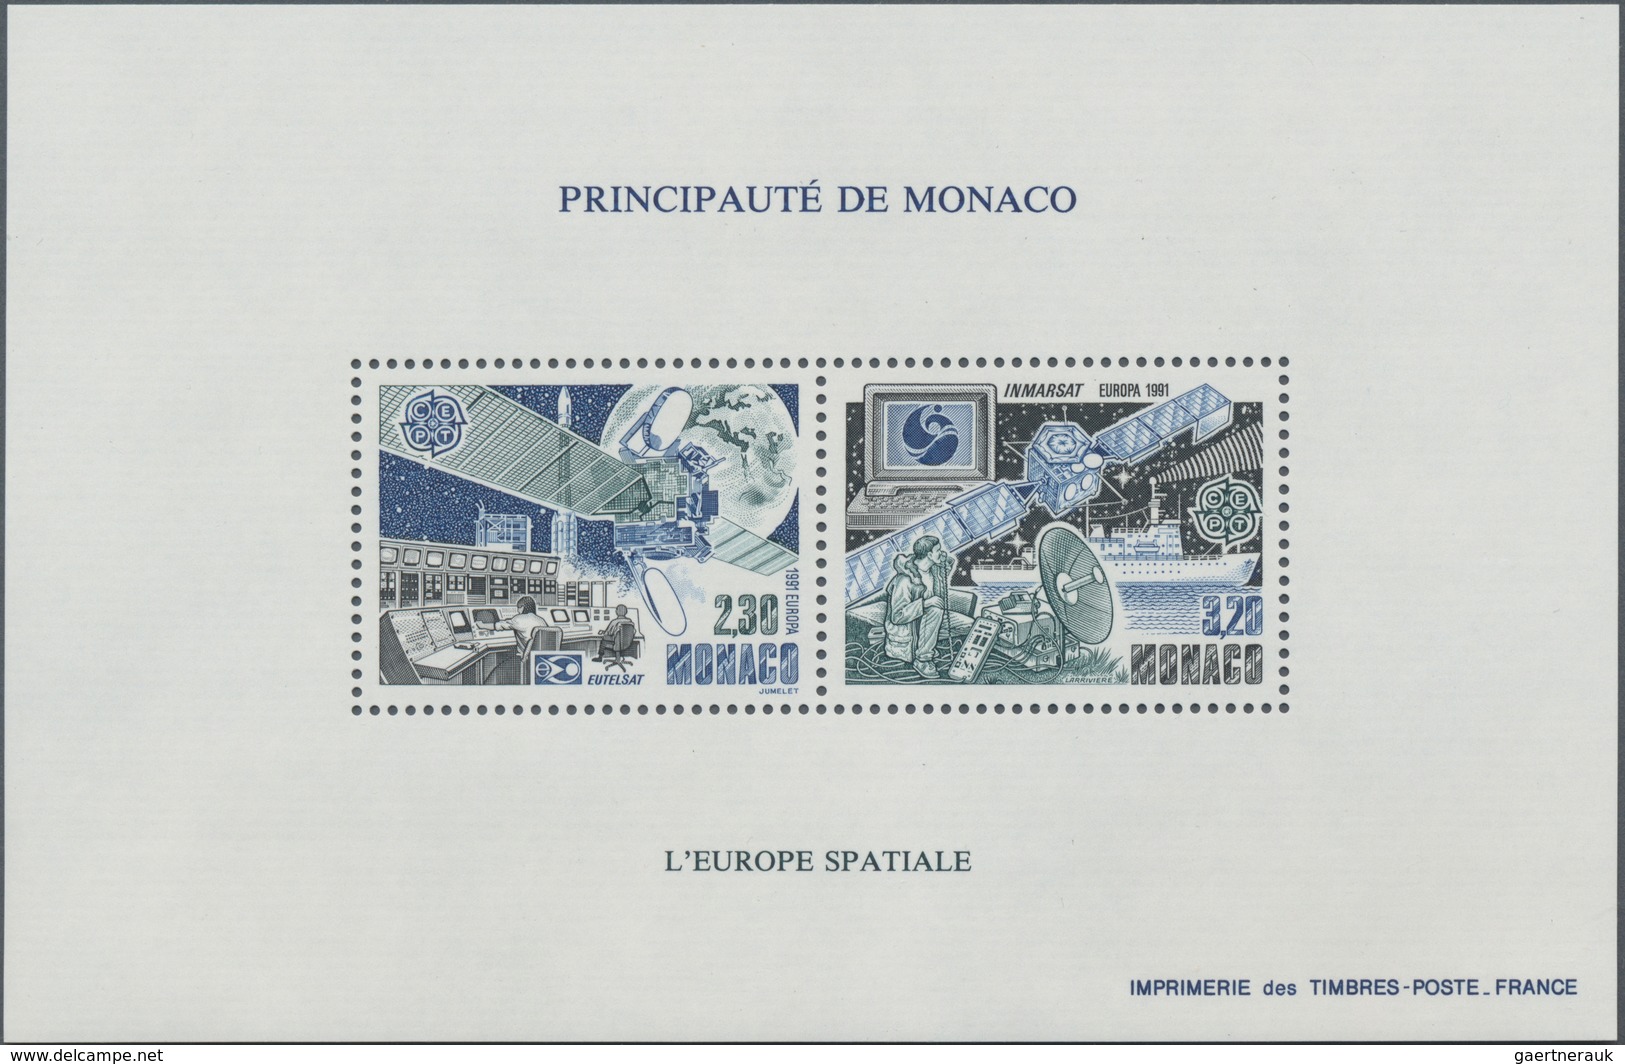 Monaco: 1991, Cept "Space", Bloc Speciaux Perforated, 47 Pieces Mint Never Hinged. Maury BS14 (47), - Usados